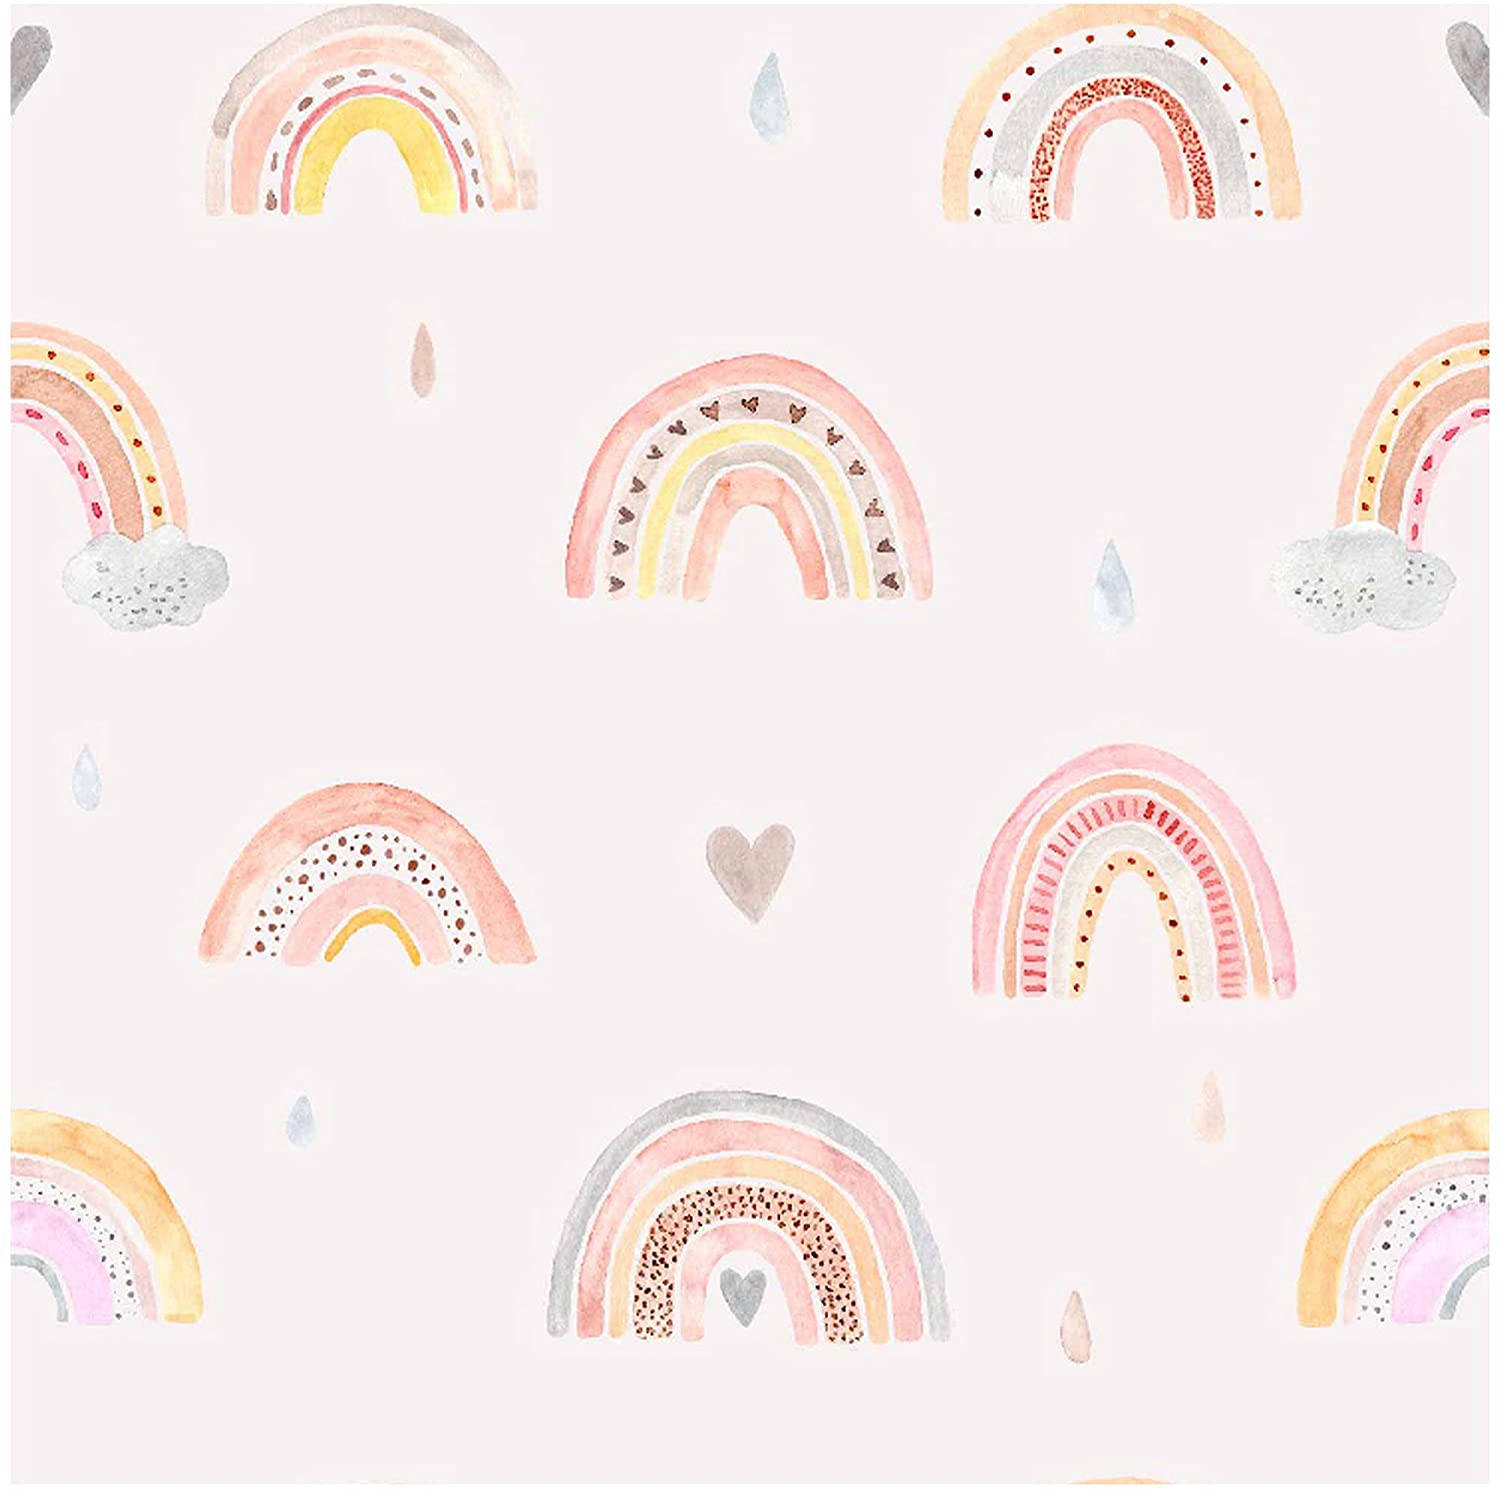 Experience colorful bohemian magic with this vibrant rainbow Wallpaper